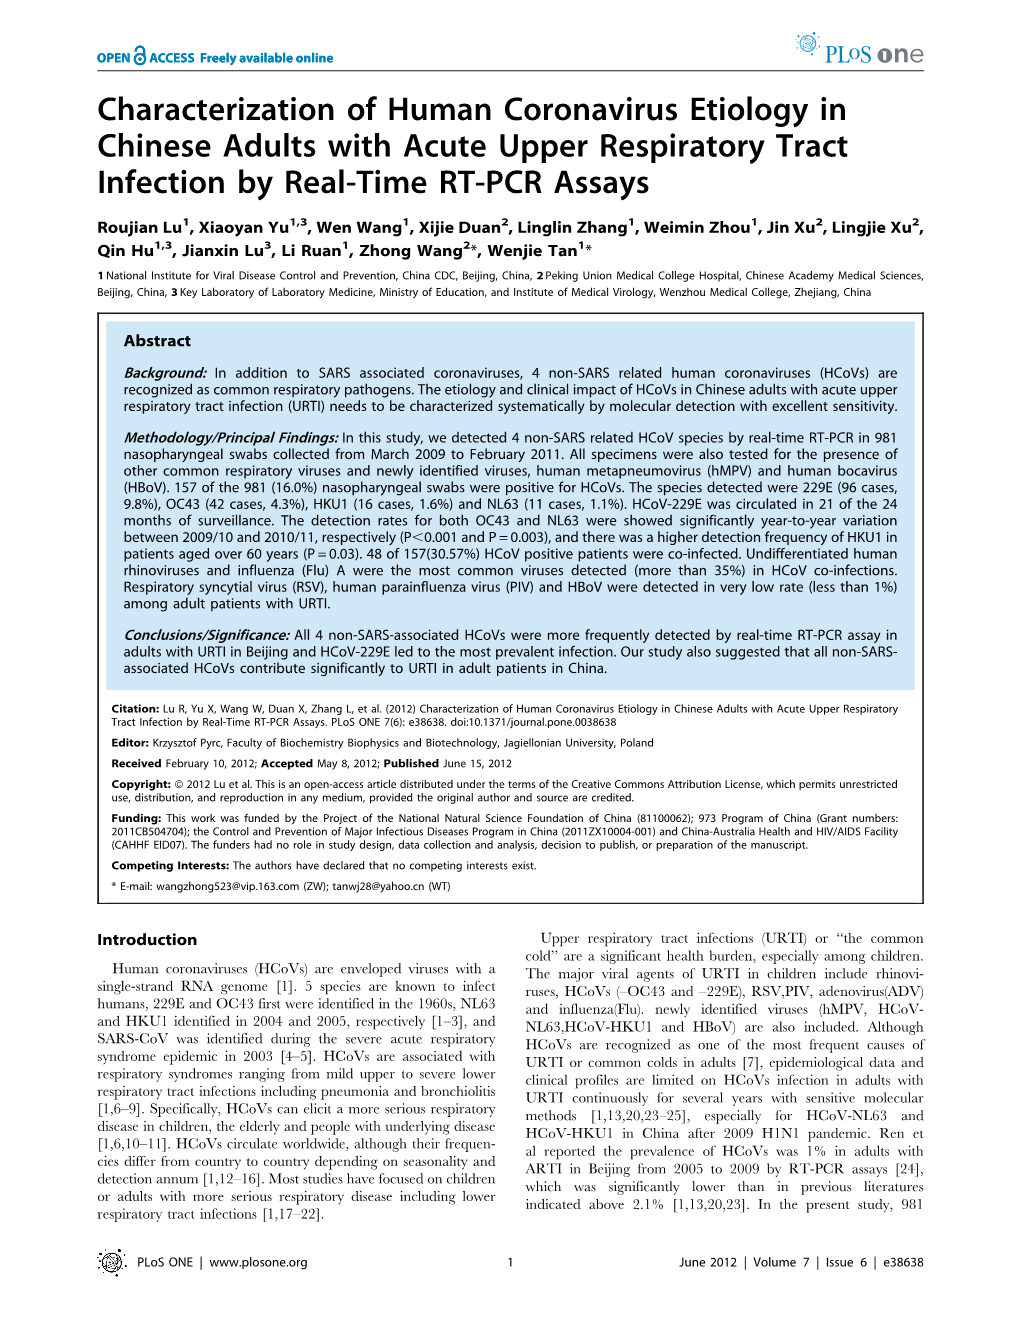 Characterization of Human Coronavirus Etiology in Chinese Adults with Acute Upper Respiratory Tract Infection by Real-Time RT-PCR Assays